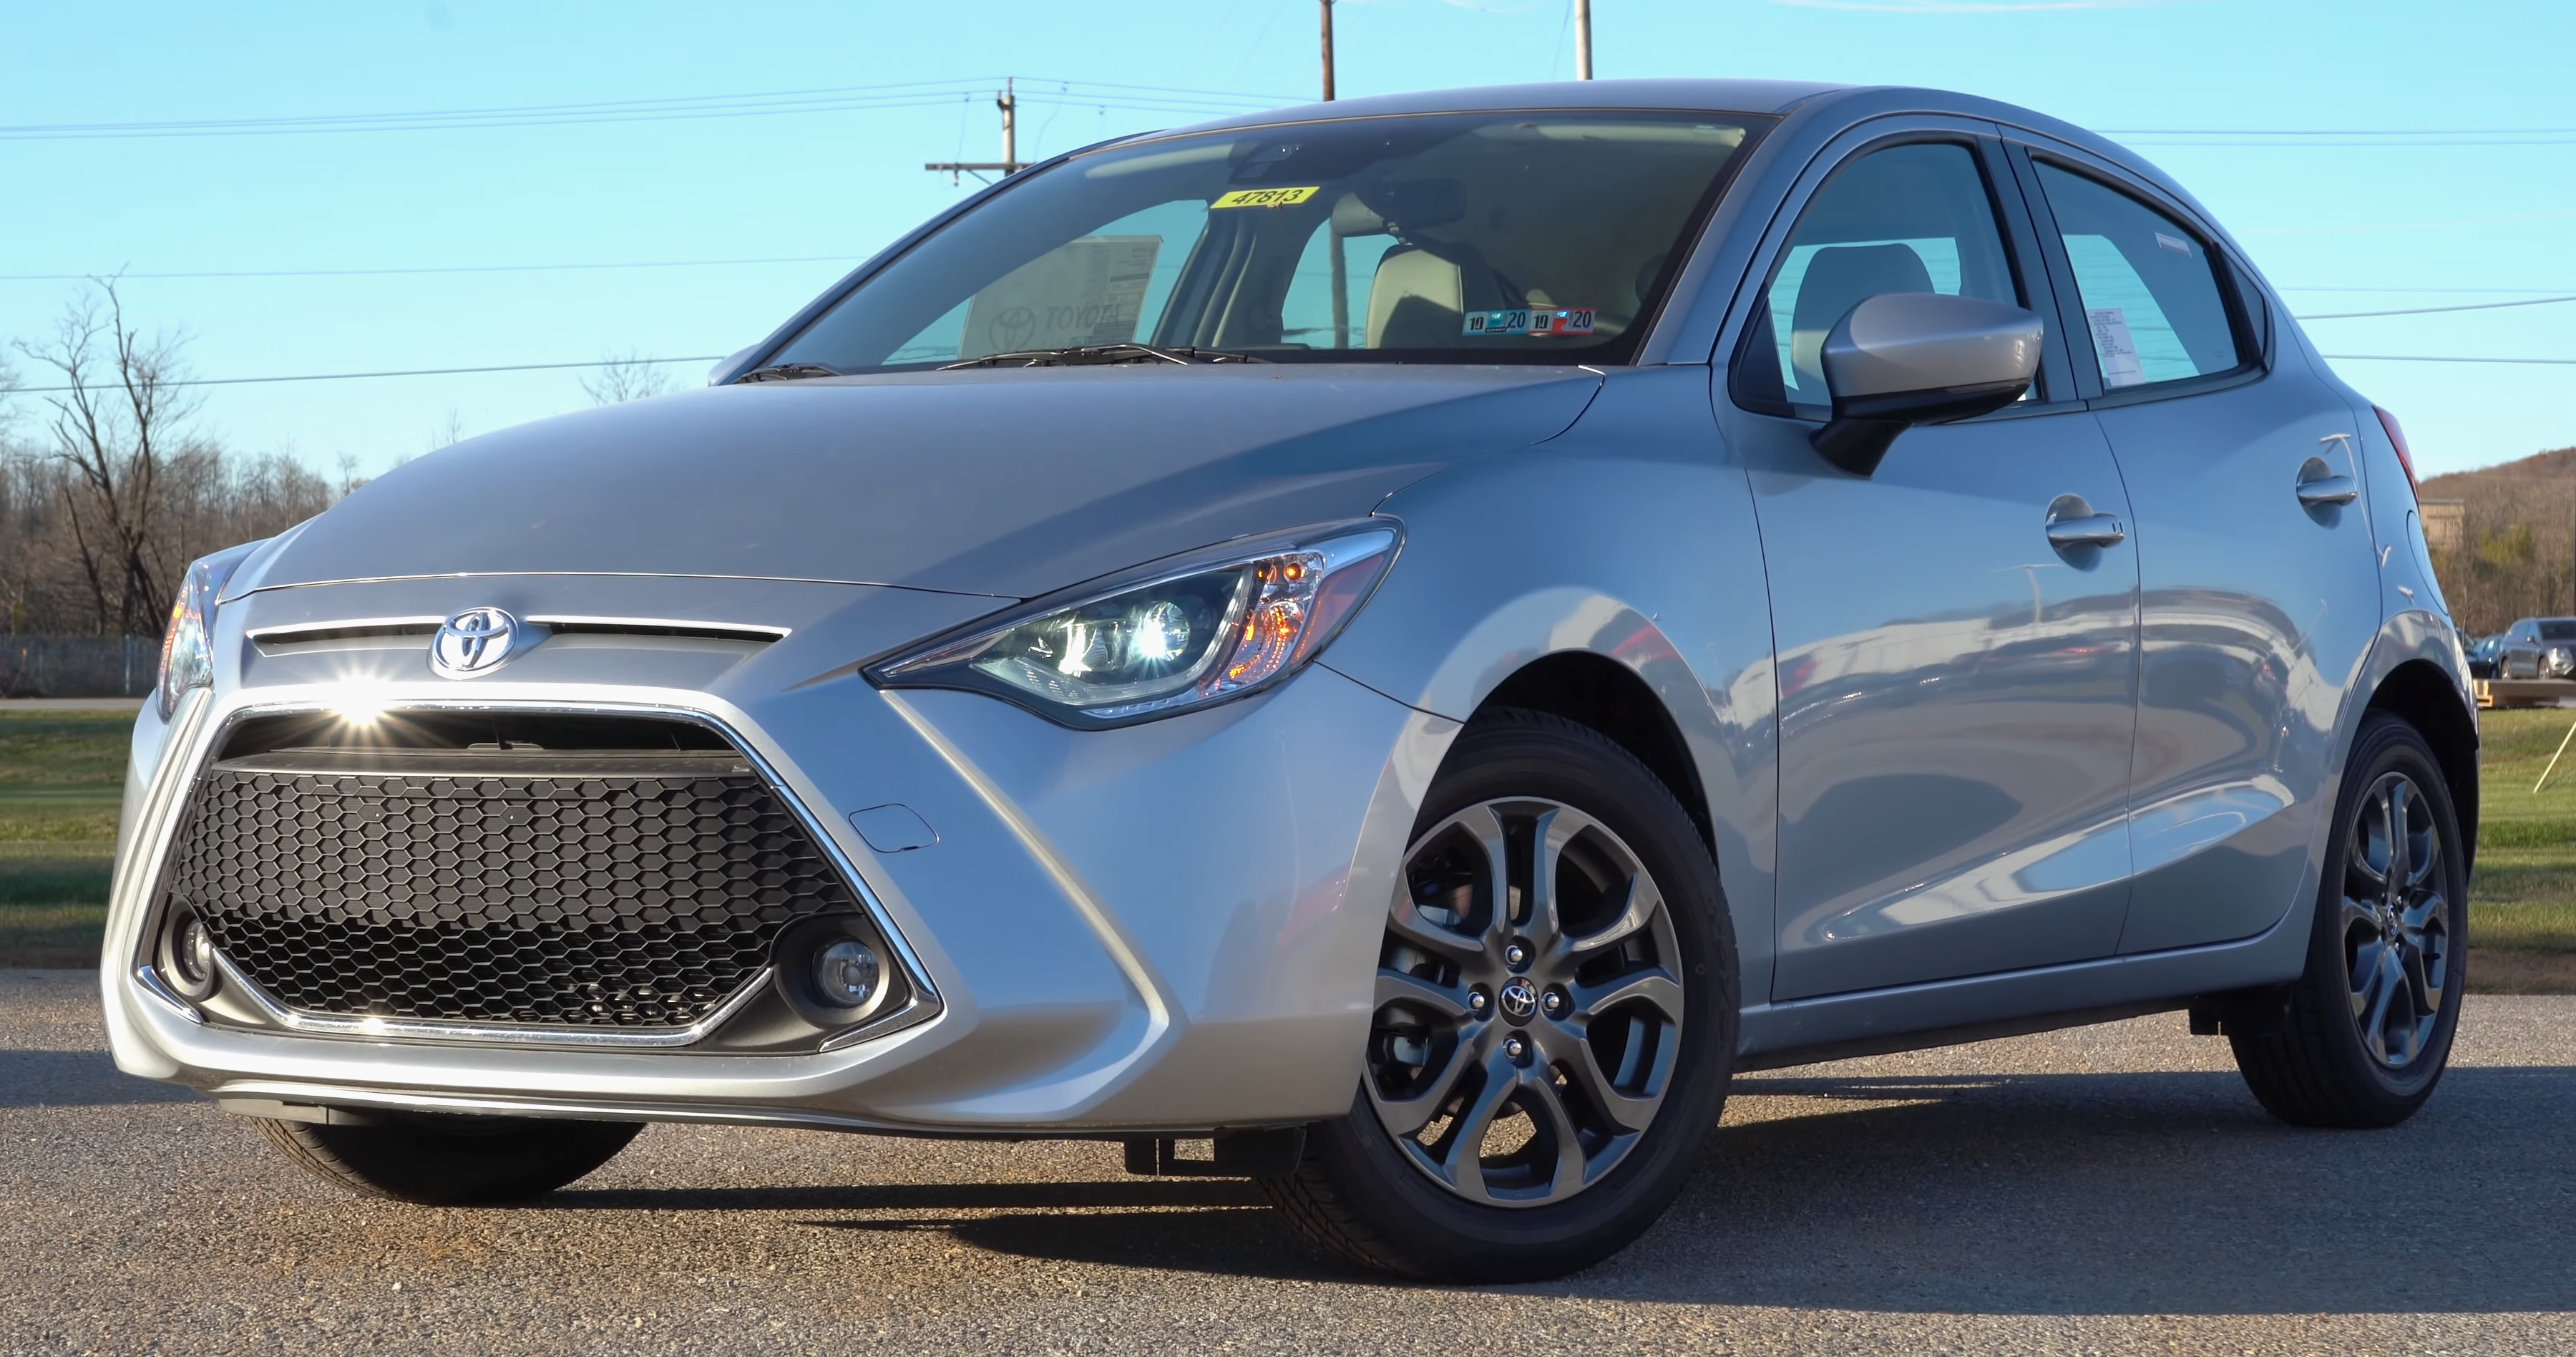 2020 Toyota Yaris XLE Hatchback Review: Adorable, Affordable